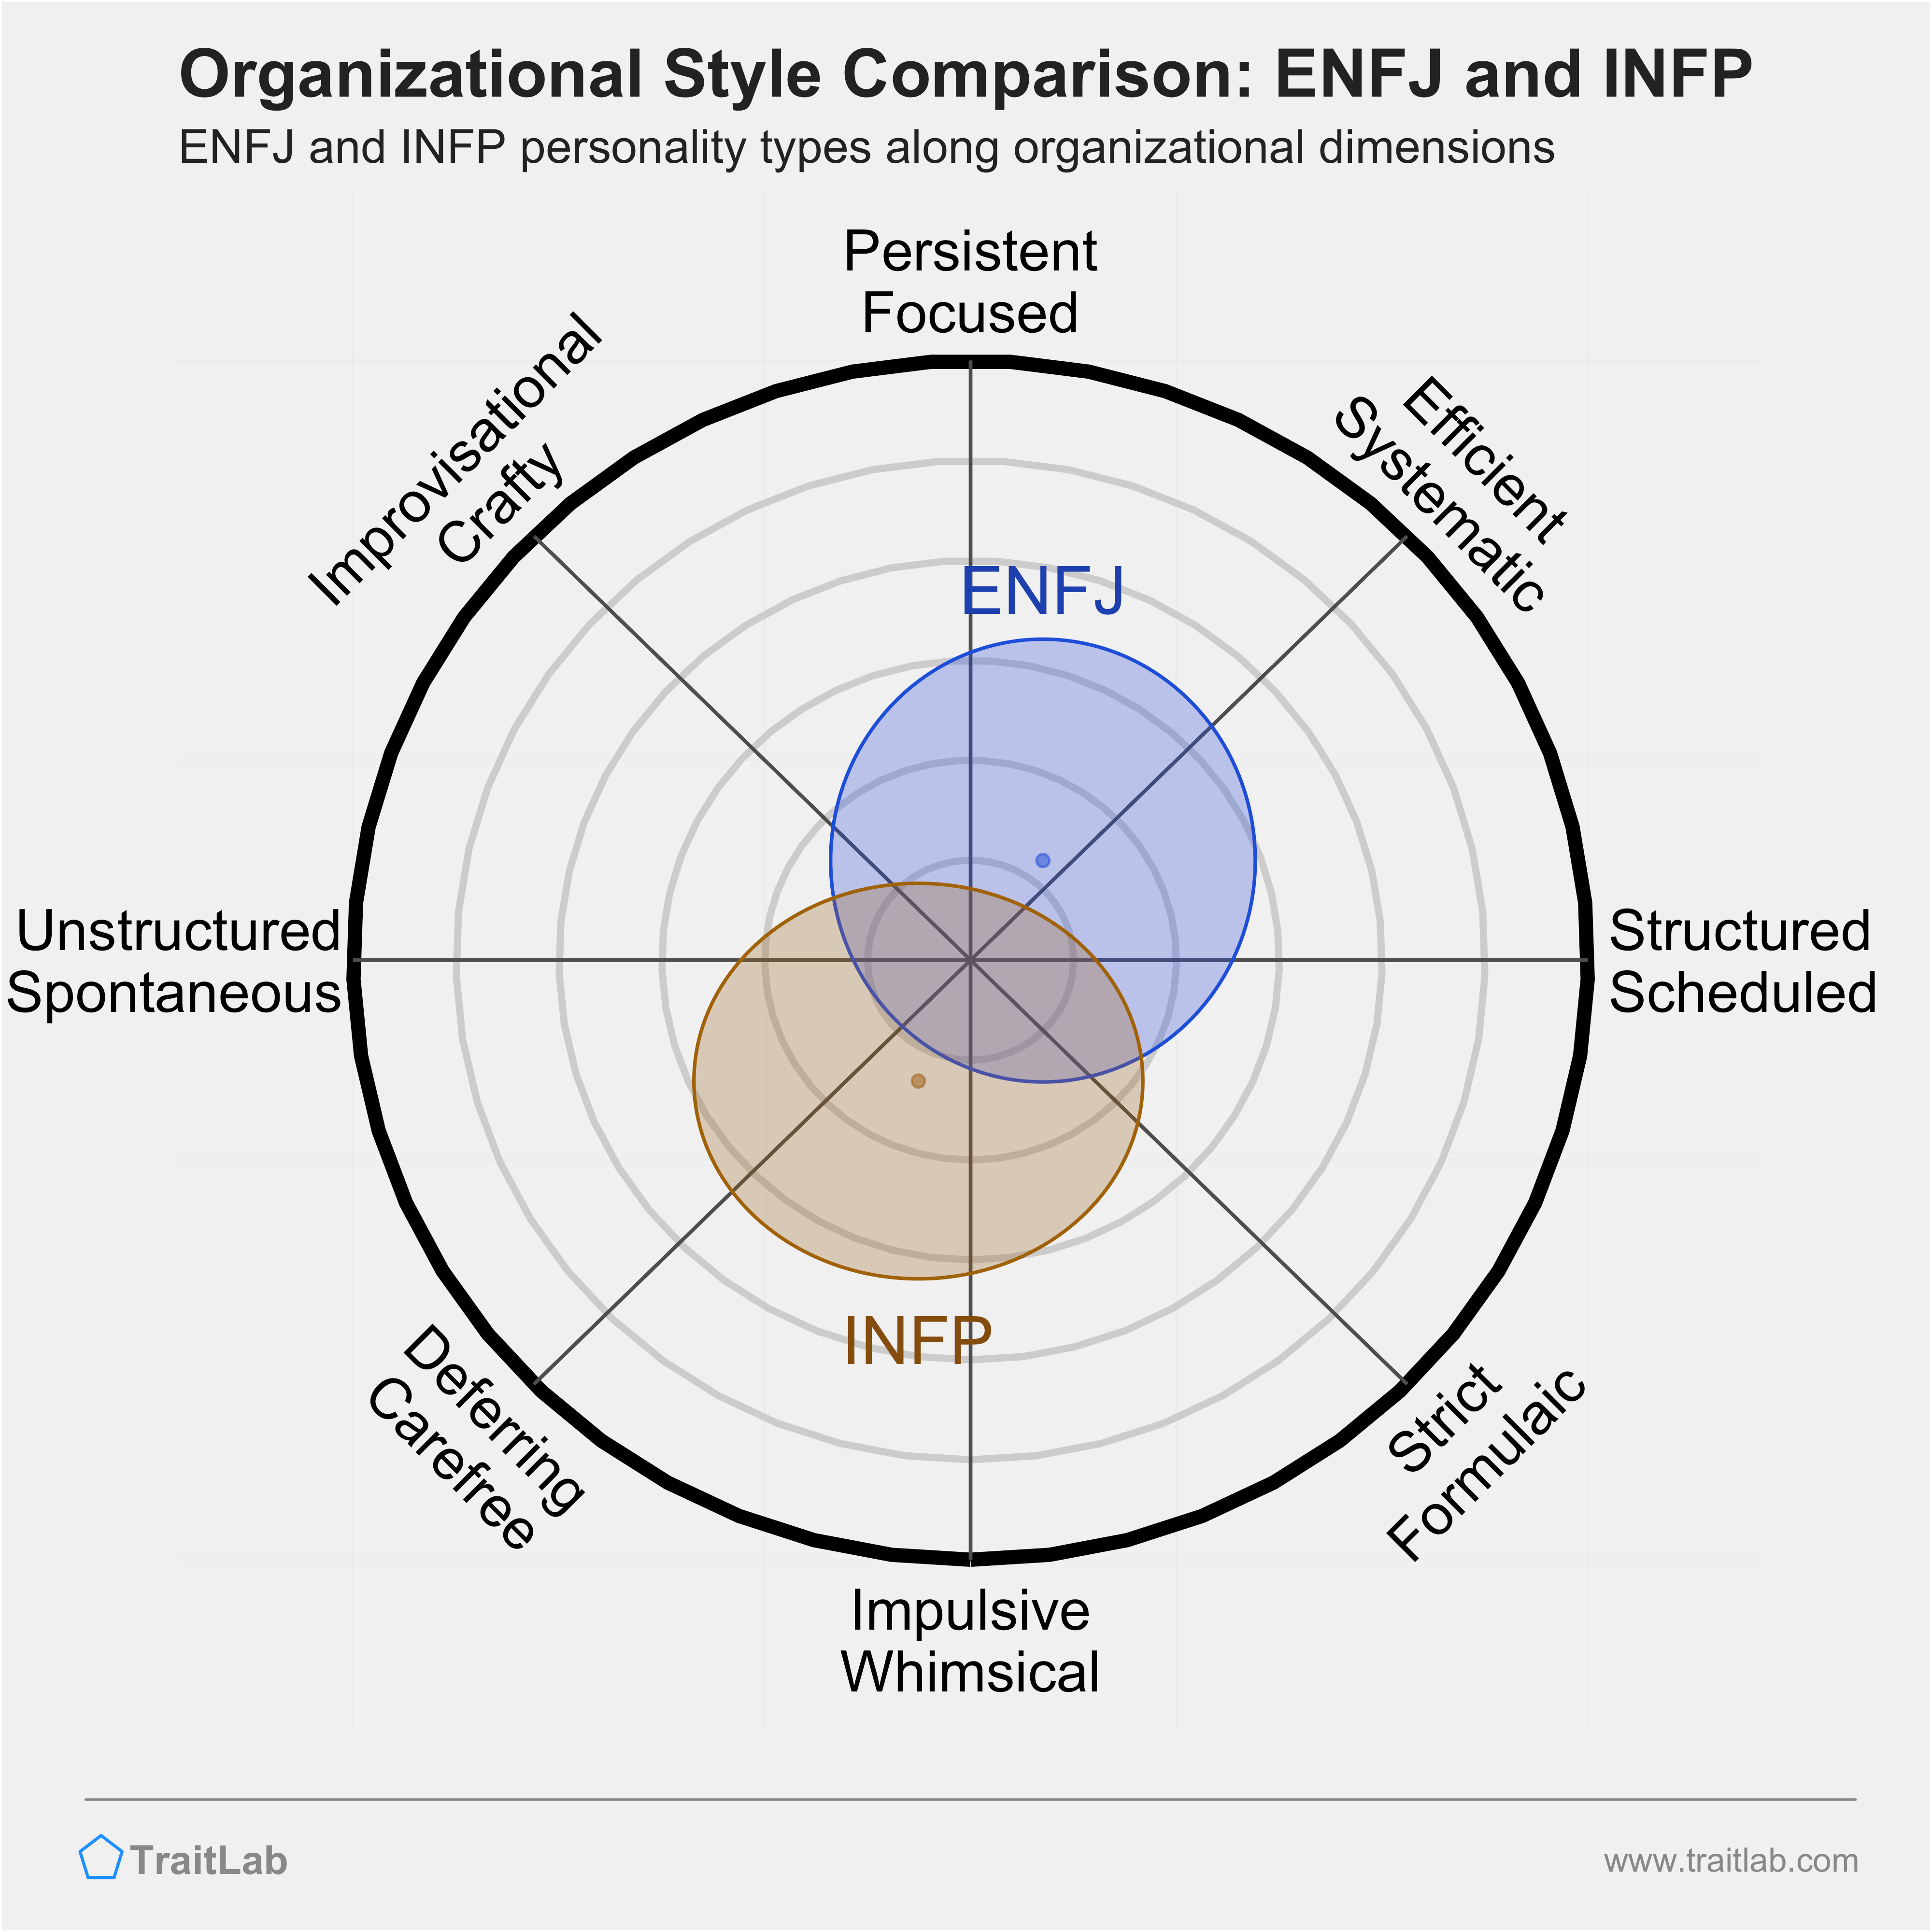 ENFJ and INFP comparison across organizational dimensions